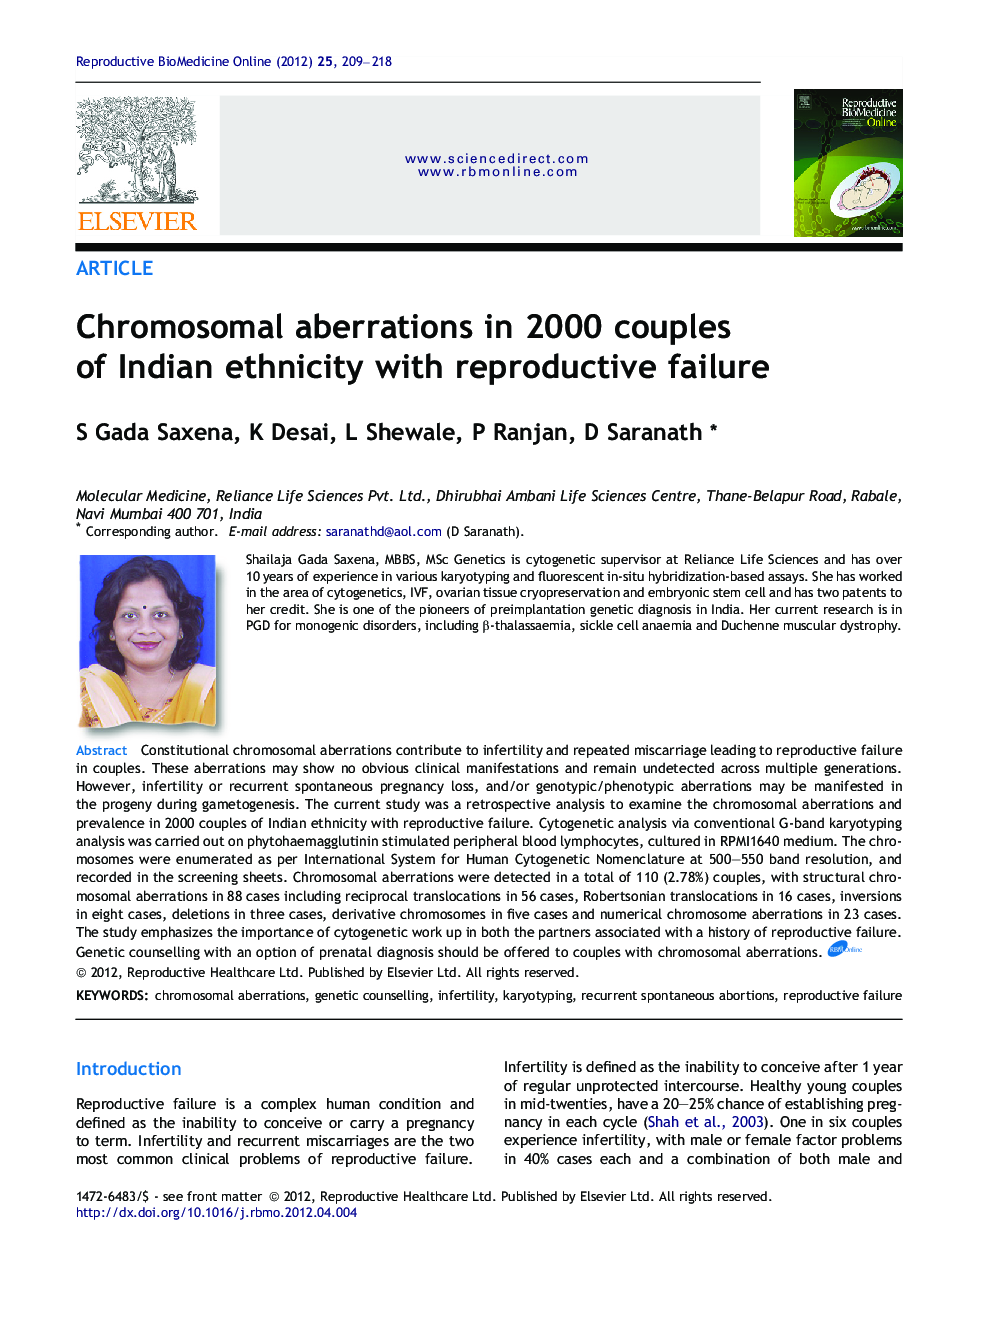 Chromosomal aberrations in 2000 couples of Indian ethnicity with reproductive failure 